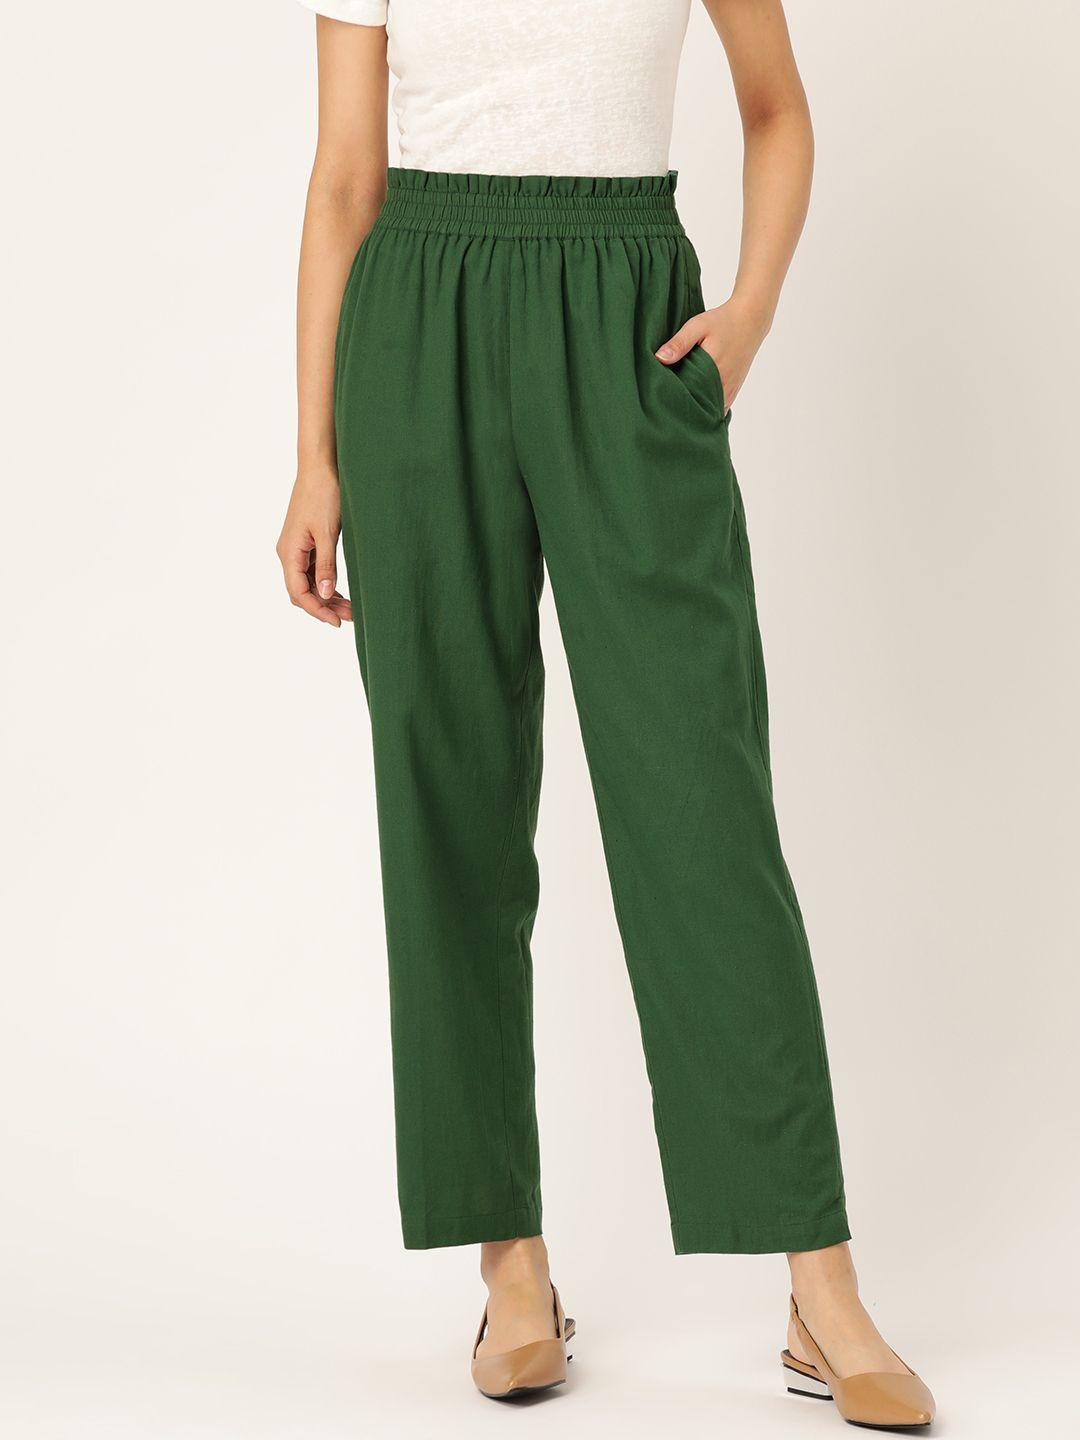 shae-by-sassafras-women-green-tapered-fit-solid-paper-bag-trousers